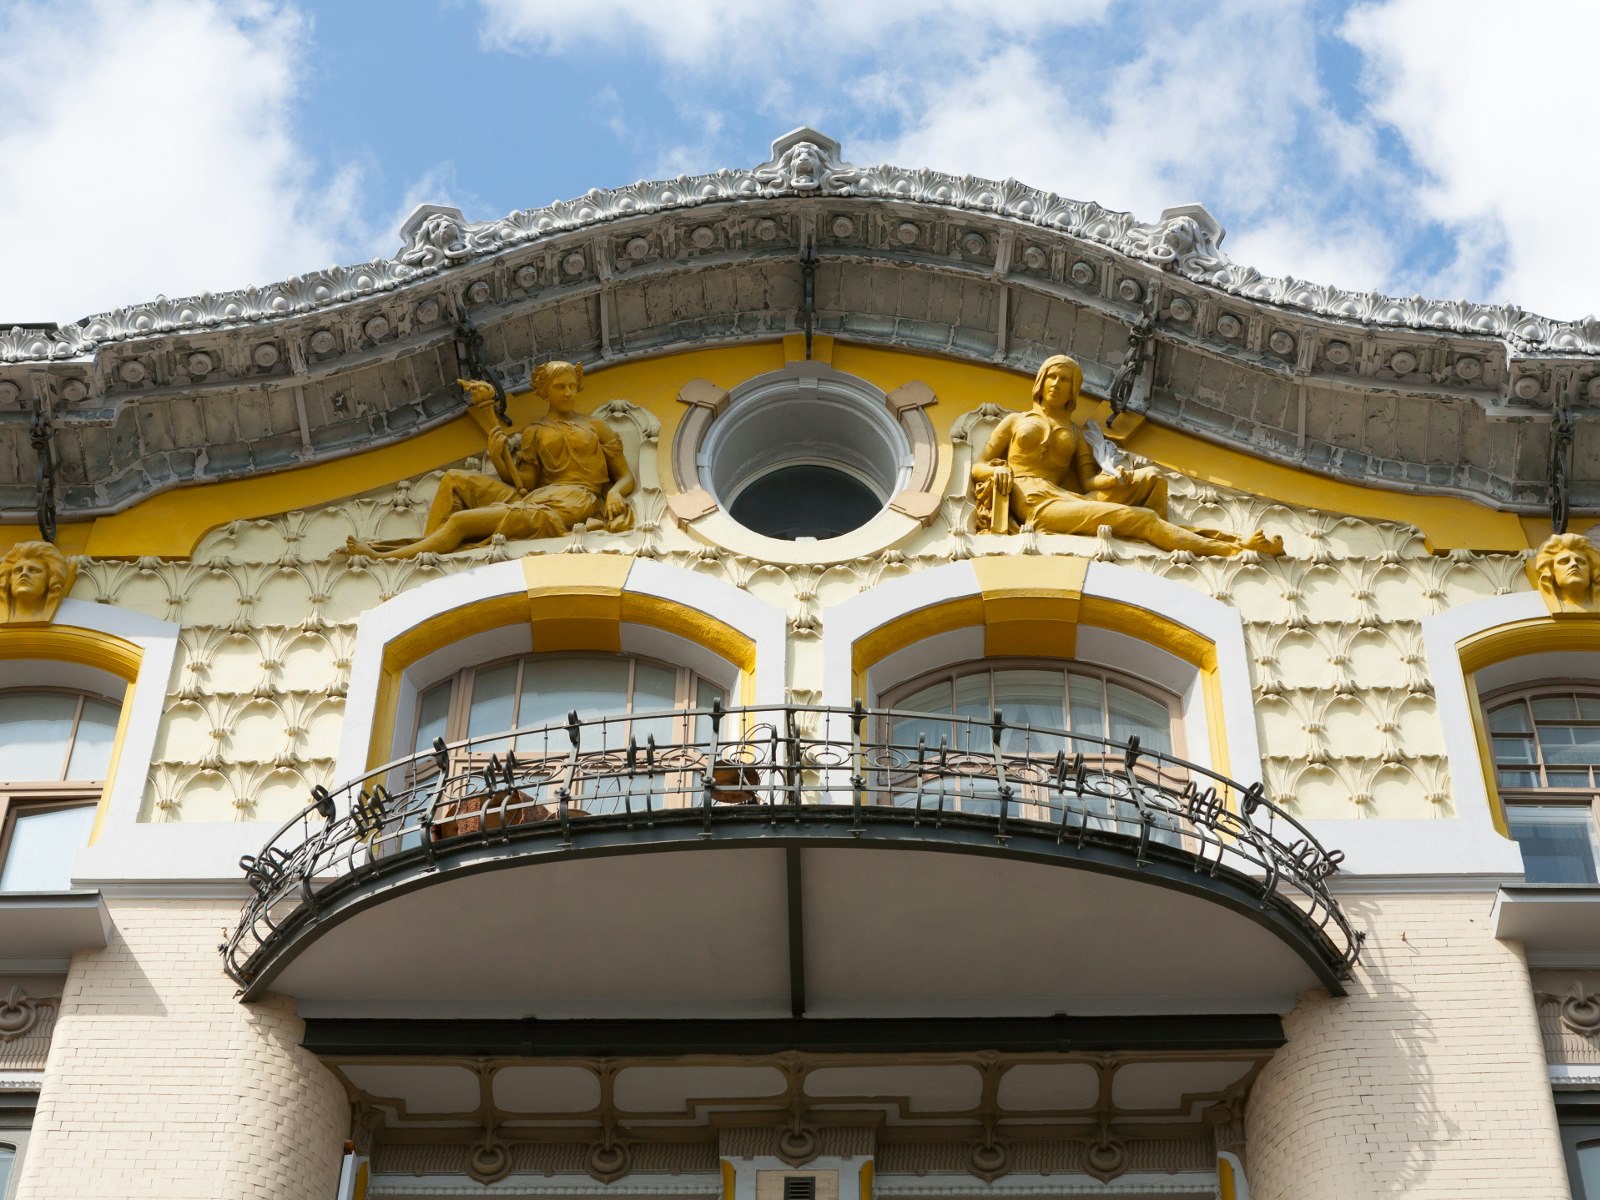 Elaborate facade with statues and balcony on a mansion in Moscow